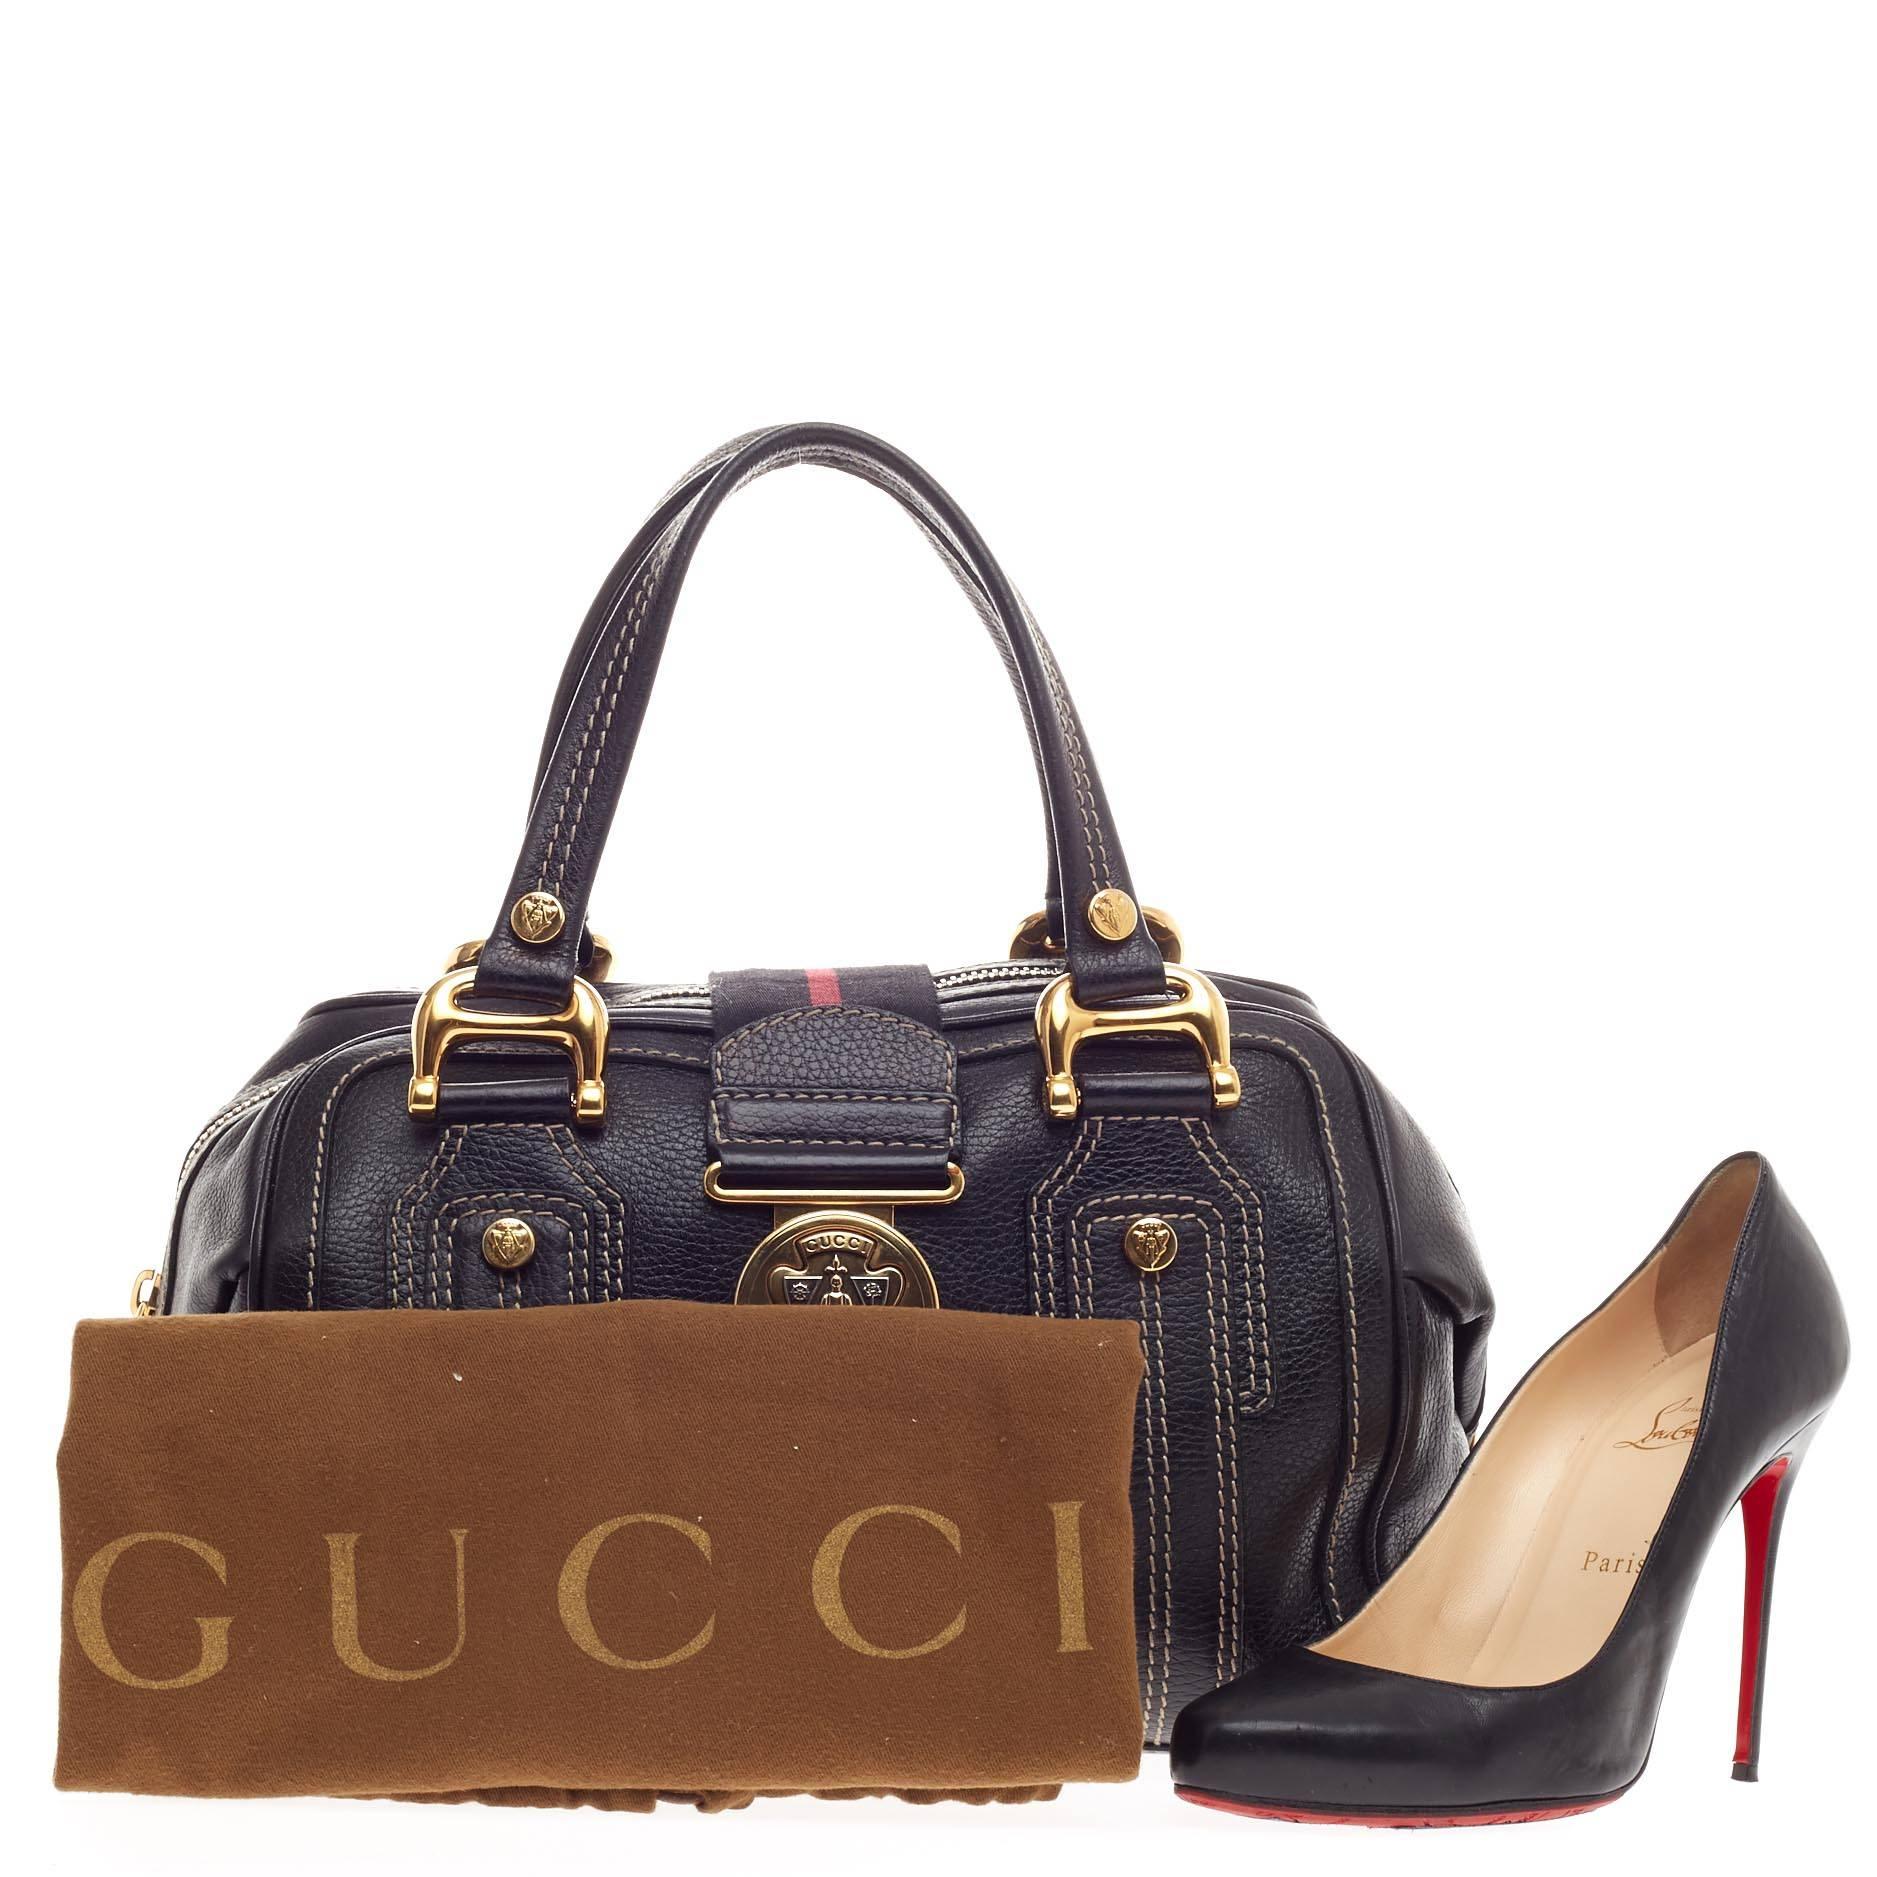 This authentic Gucci Aviatrix Satchel Leather Medium combines functional design with vintage style. Crafted in black pebbled leather, this bag features a striped canvas center panel, dual-flat handles, stand-out beige contrast stitching, protective